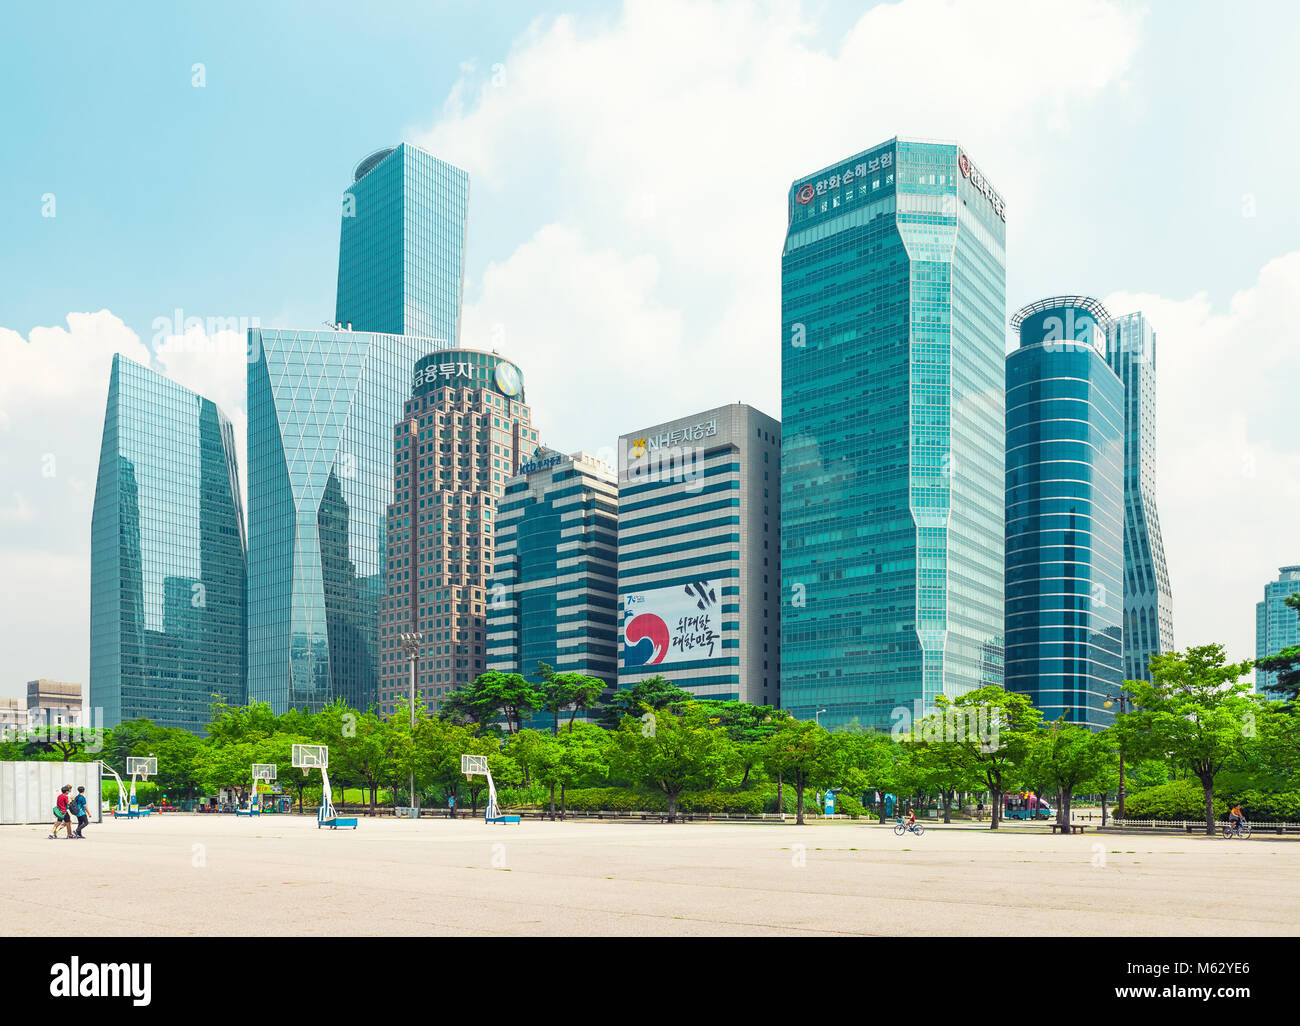 SEOUL, KOREA - AUGUST 14, 2015: Yeouido - Seoul's main finance and investment banking district and office area of Korea’s top businesses in finance, I Stock Photo